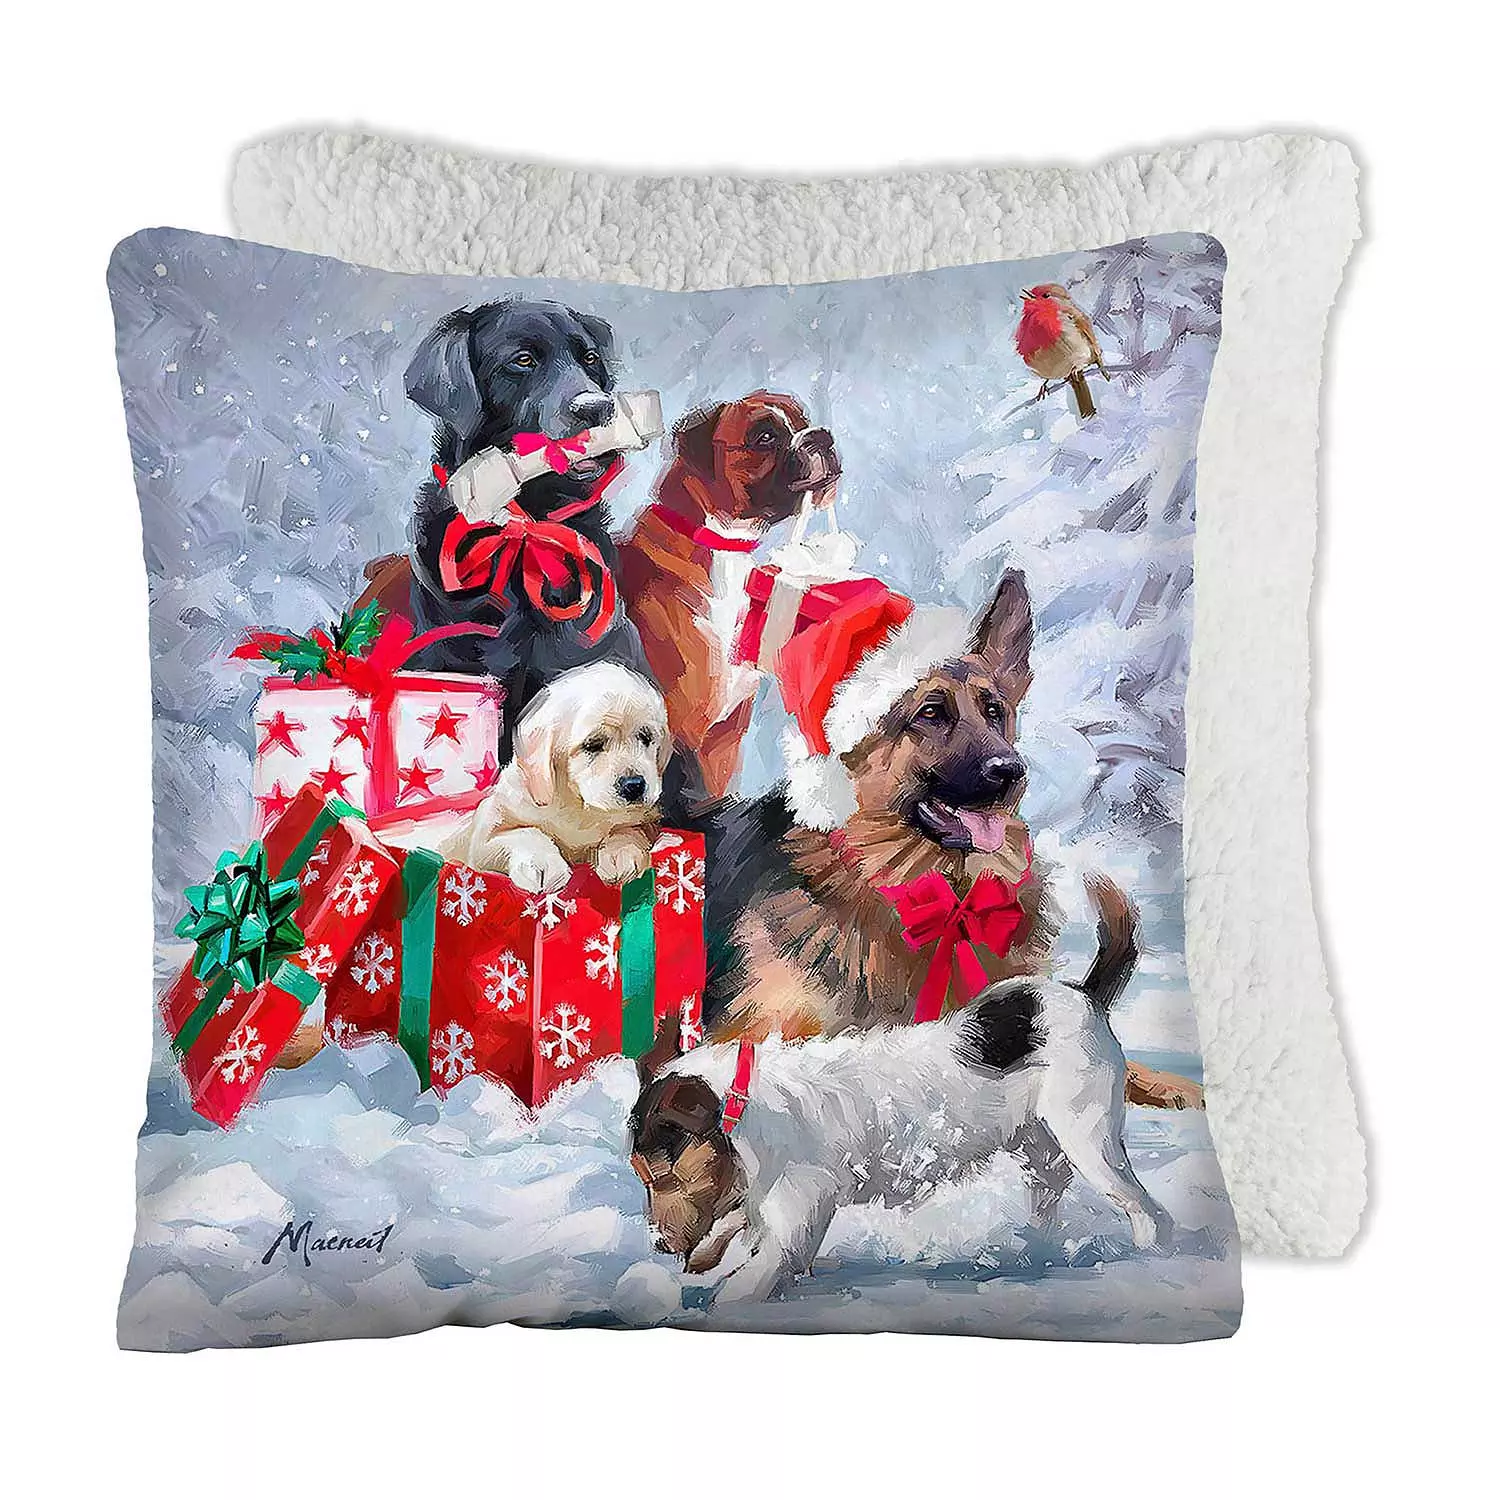 Printed cushion with sherpa backing, puppy gift, 17"x17"